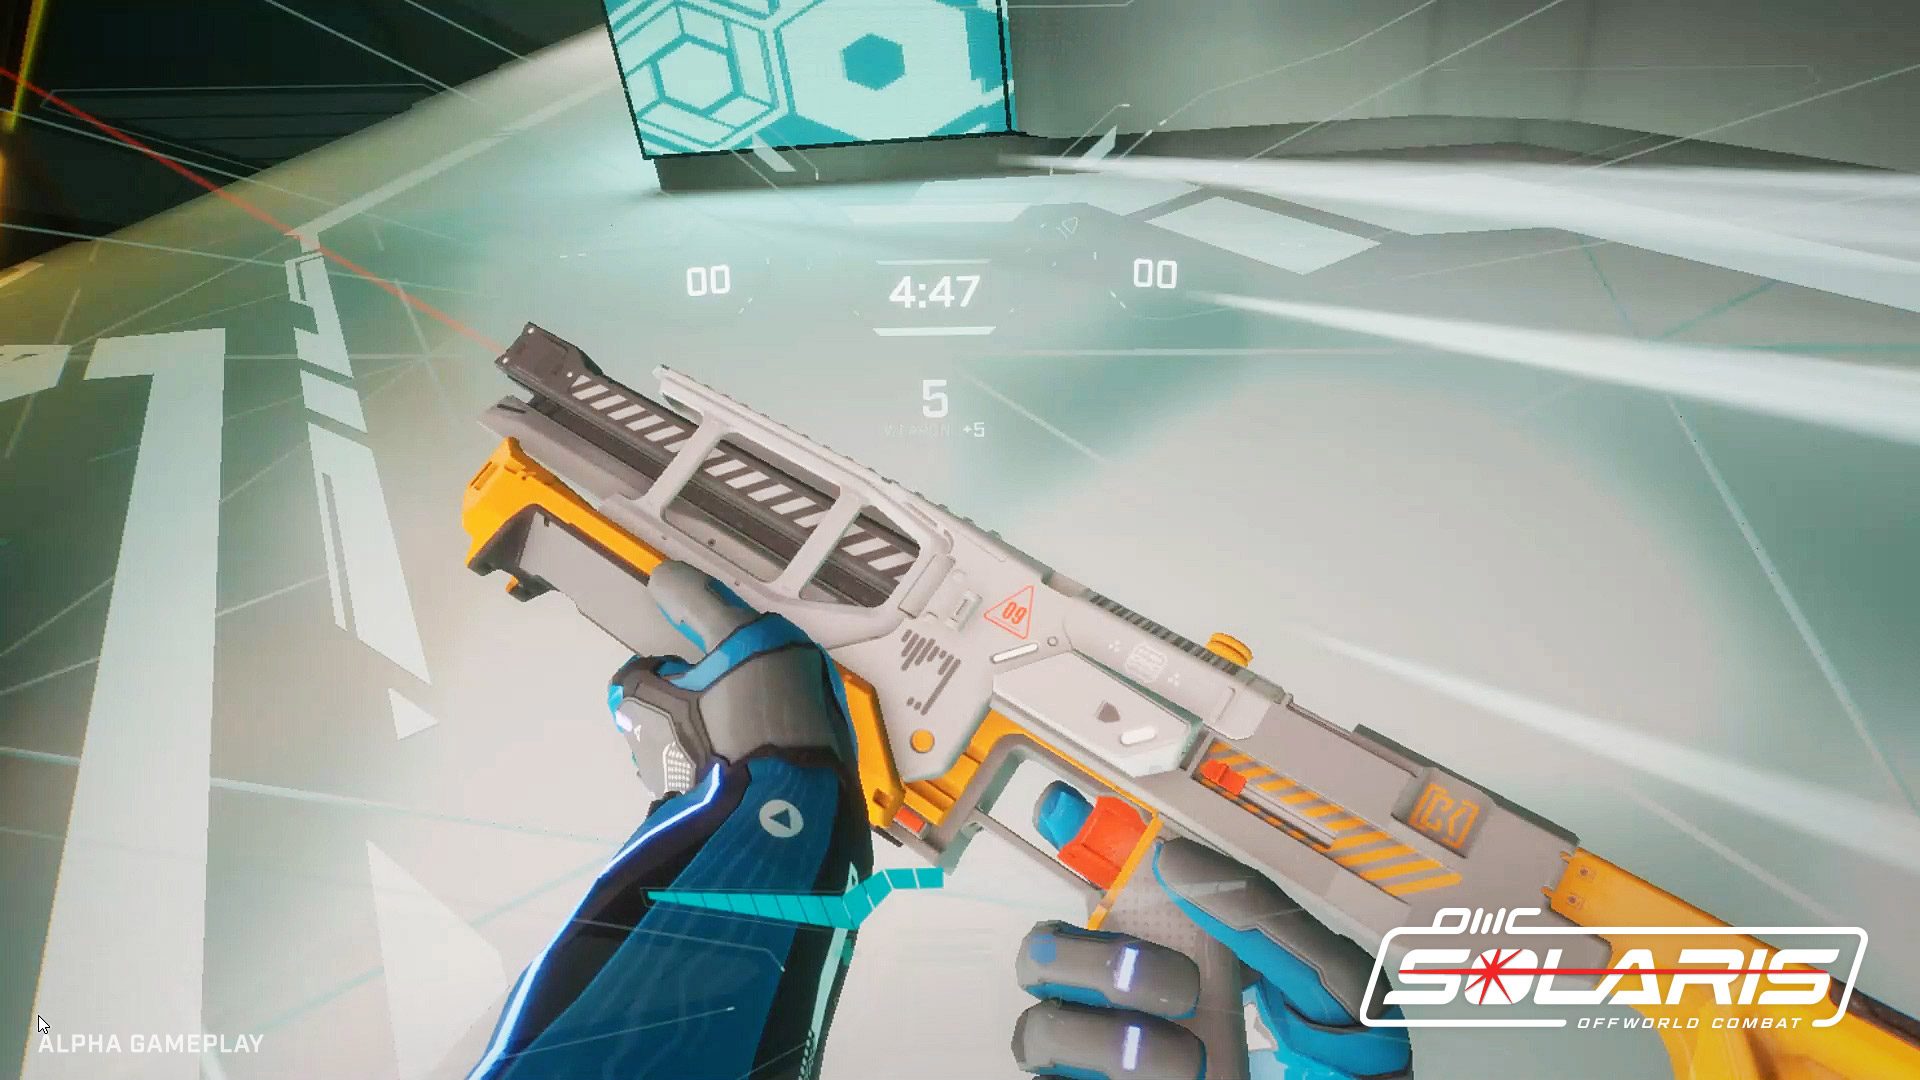 solid Sodavand Forældet Solaris Offworld Combat' Preview – Laser Tag with Competitive Ambitions